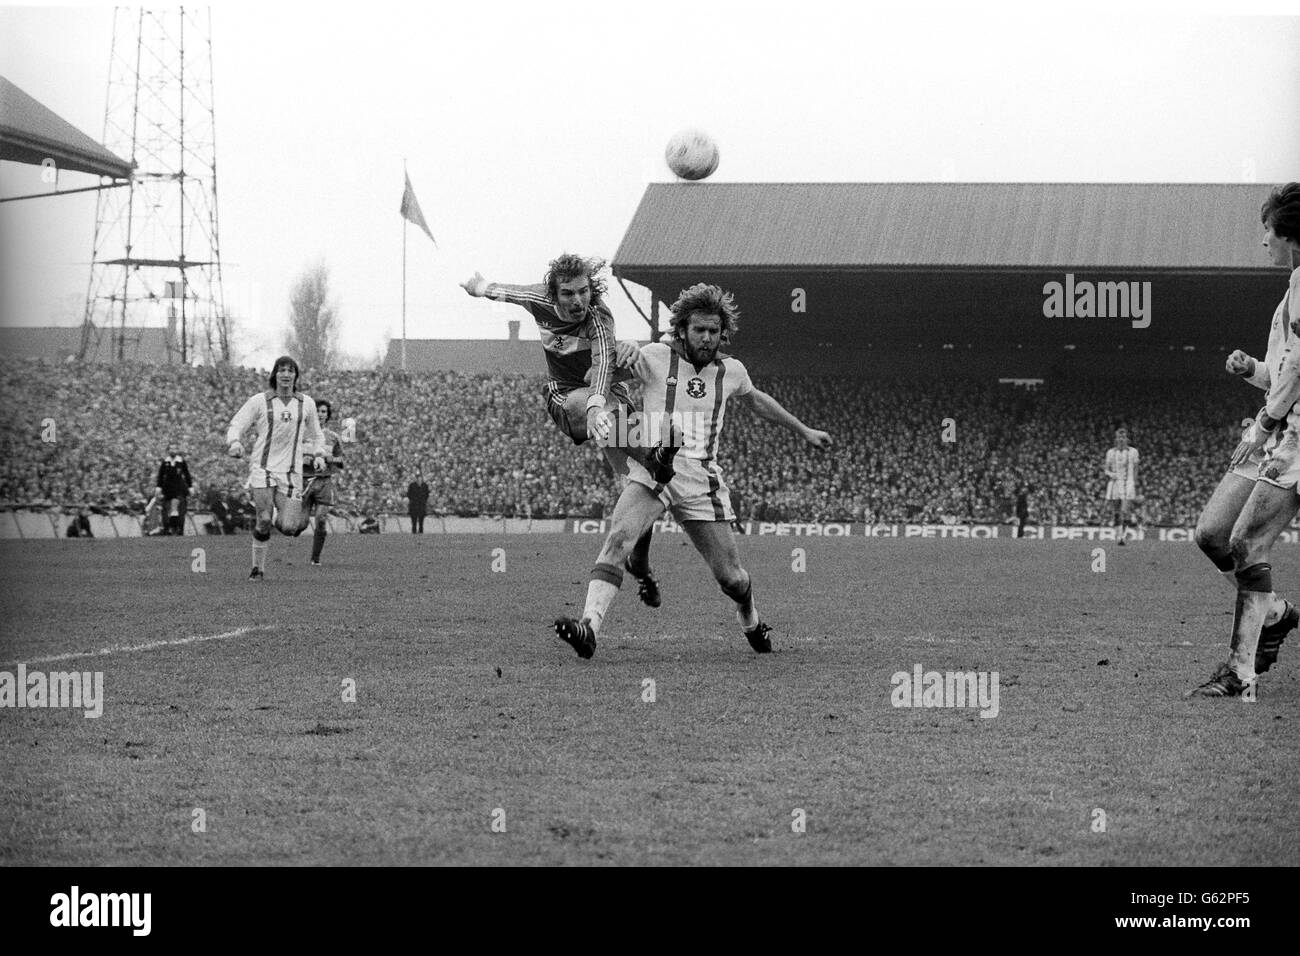 Middlesbrough No4 John Mahoney (left) and Leyton Orient player Tony Grealish fight for the ball during the FA Cup quarter-final at Ayresome Park, Middlesbrough. Second Division Orient held Middlesbrough to a goalless draw. 12/03/1978 Stock Photo